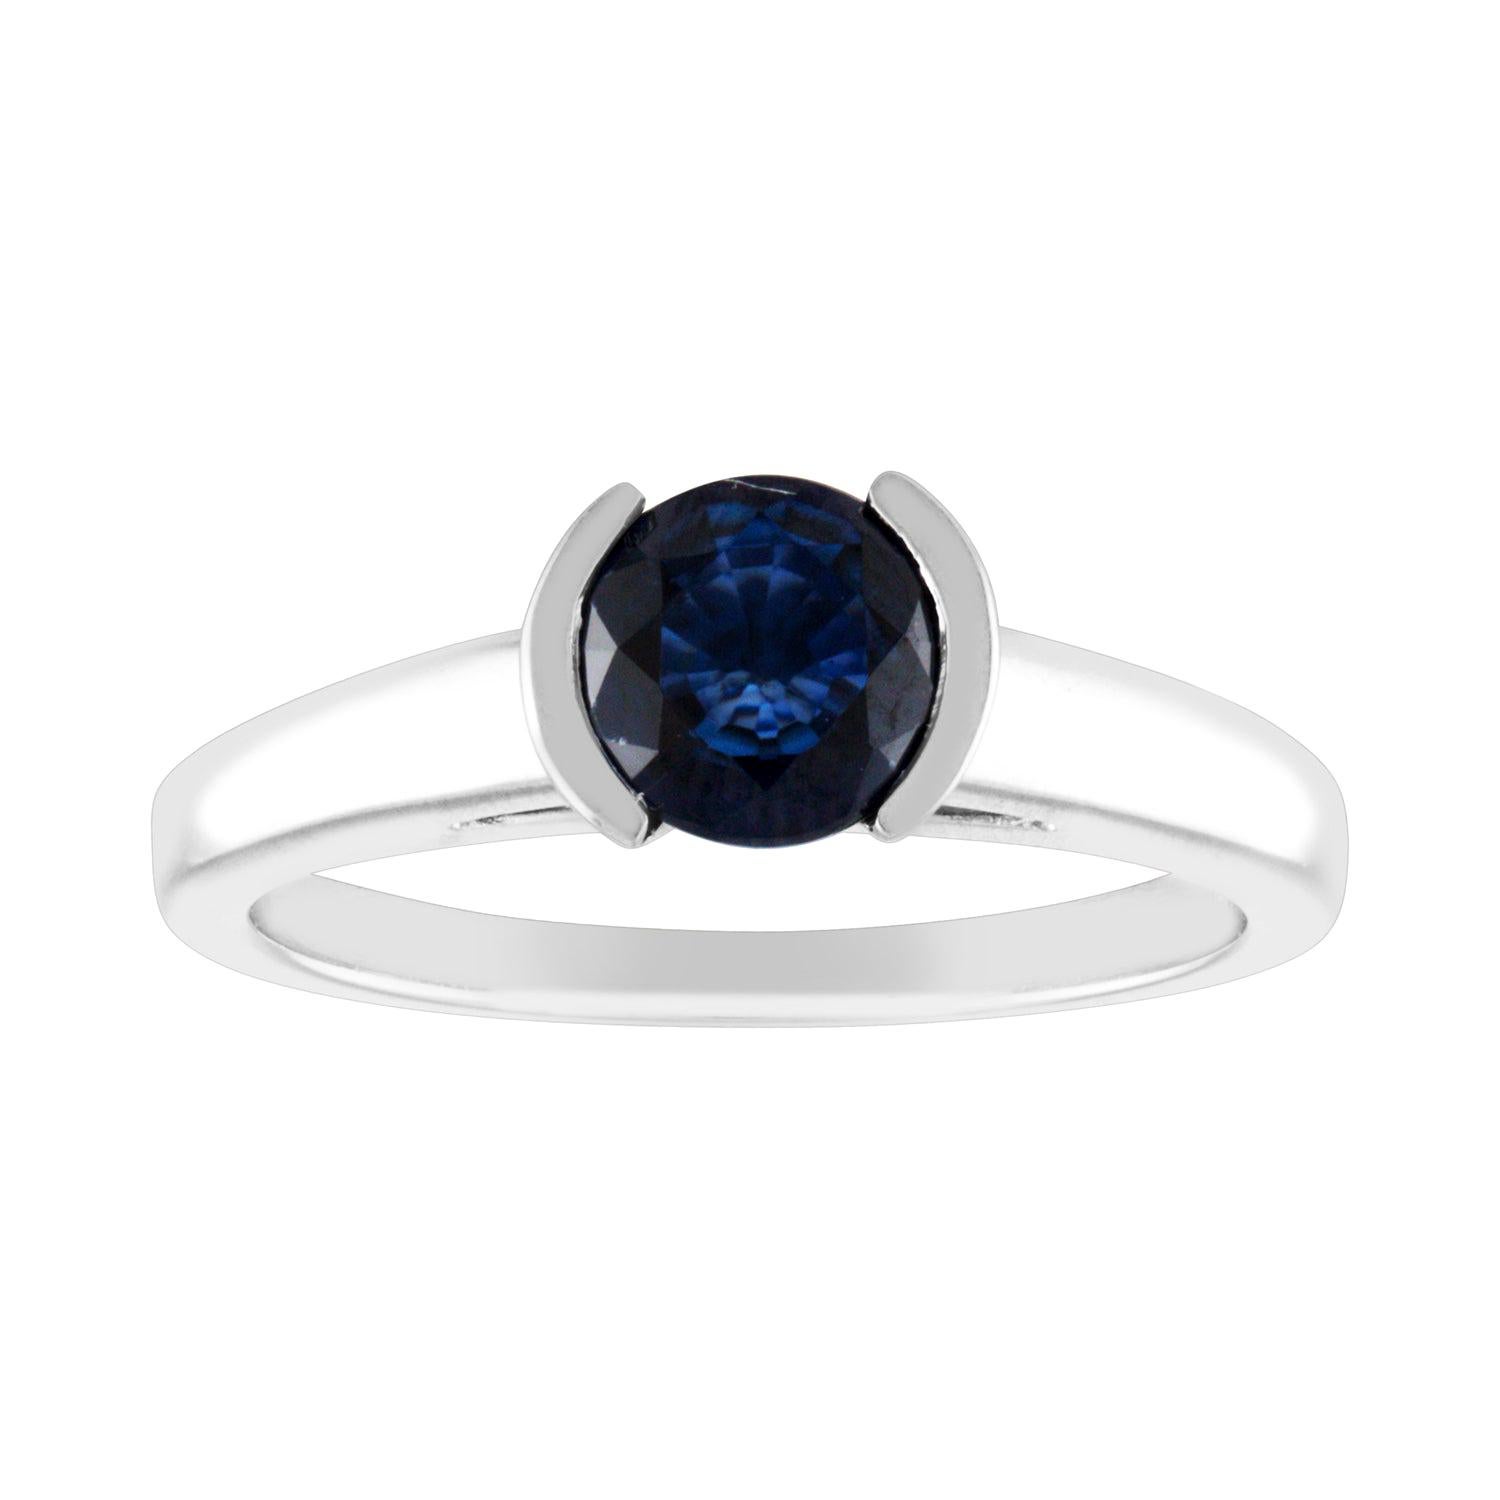 1.30 Carat Round Blue Sapphire Half Bezel Solitaire Gold Ring For Sale